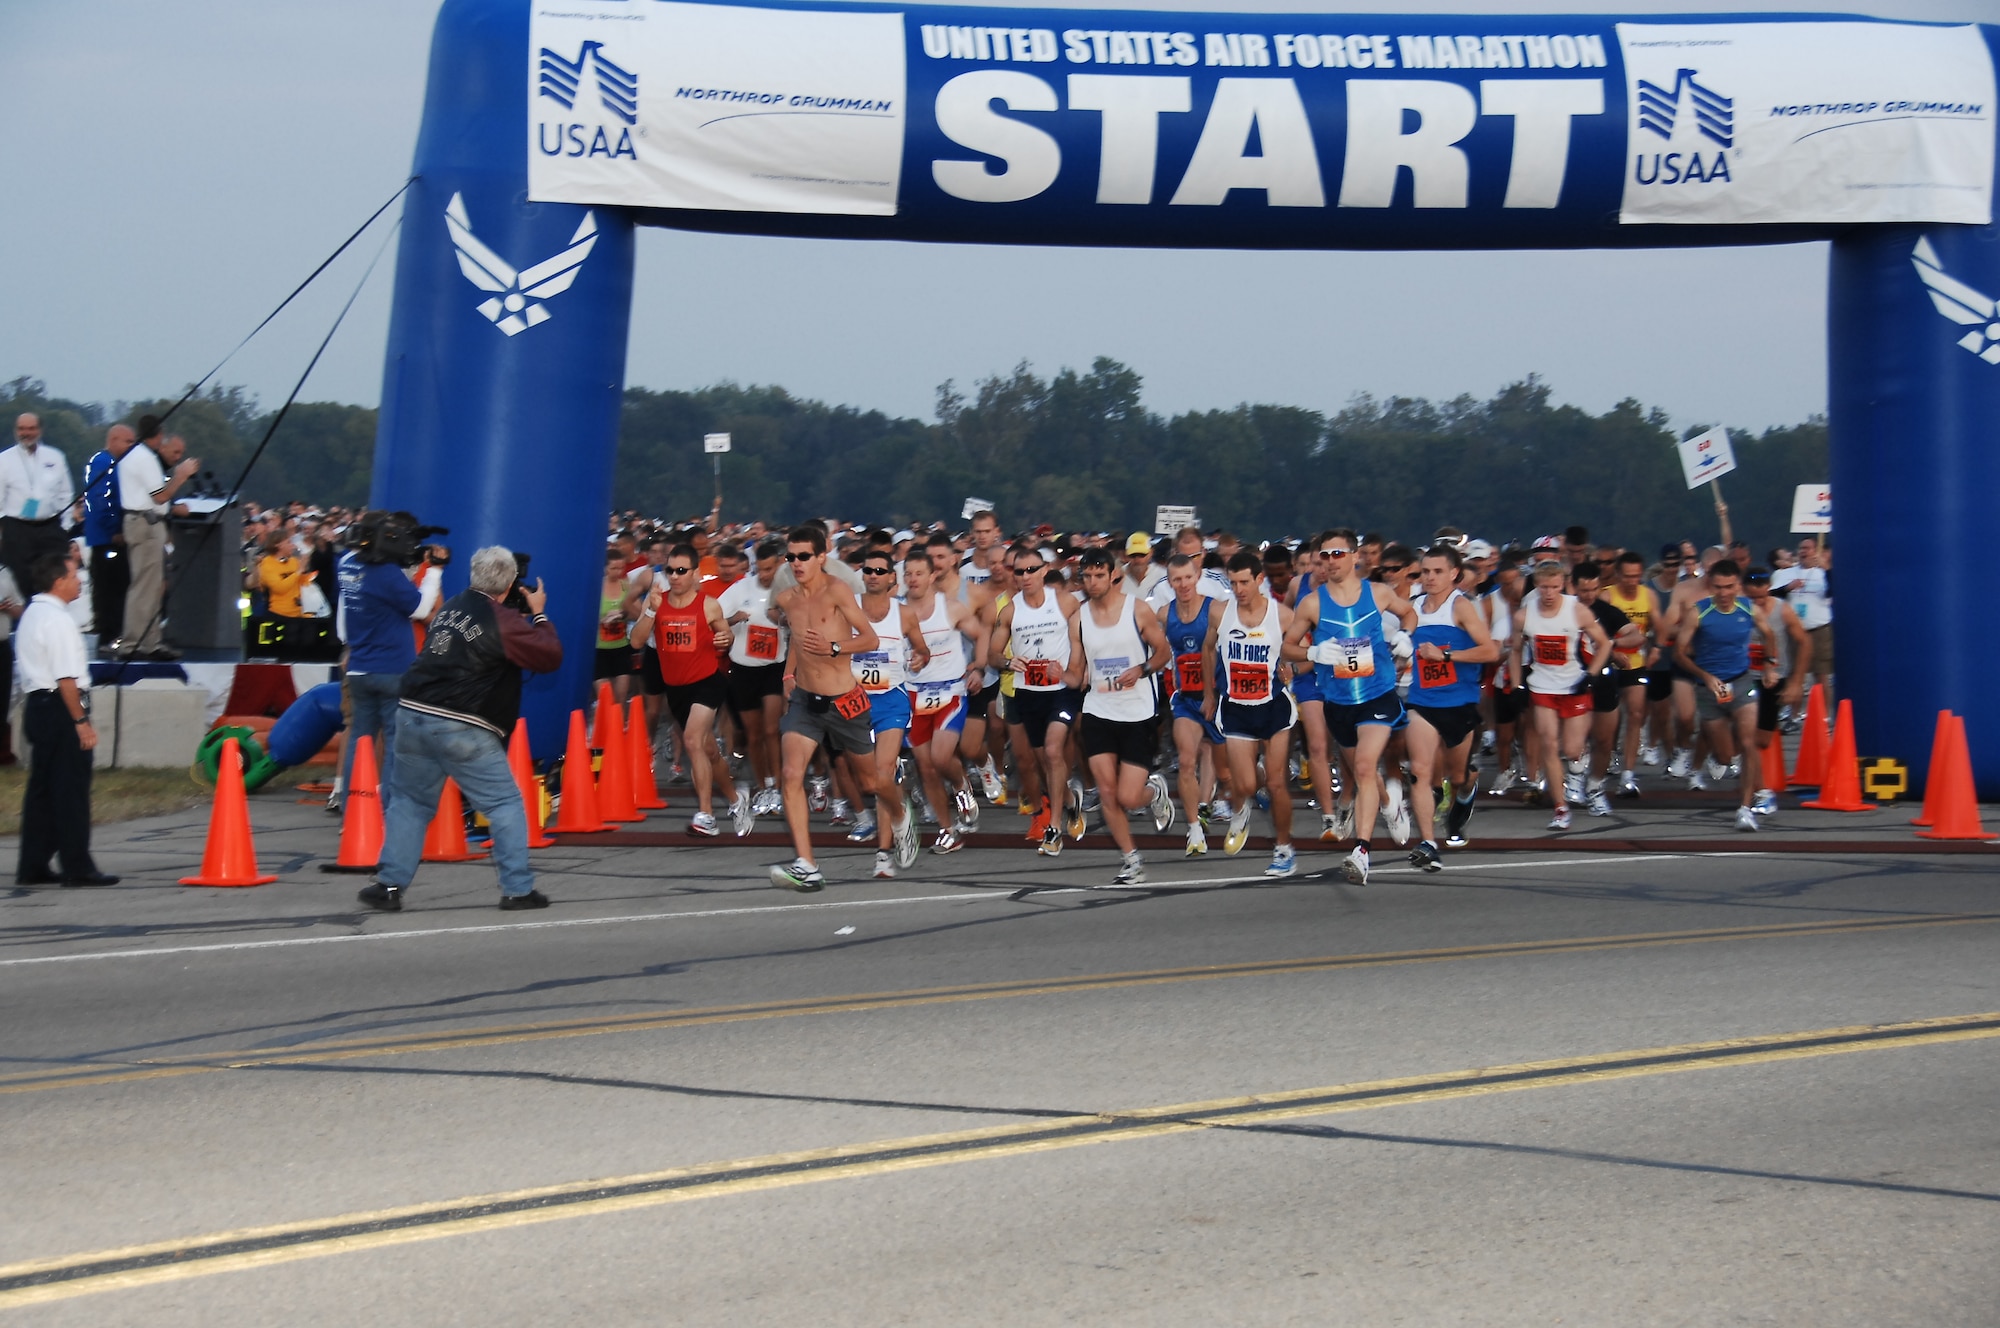 A record field of runners take off to start the 12th Annual U.S. Air Force Marathon at Wright-Patterson AFB, Ohio. Nearly 7,400 people registered to take part in the marathon events this year. (U.S. Air Force photo/Ben Strasser) 